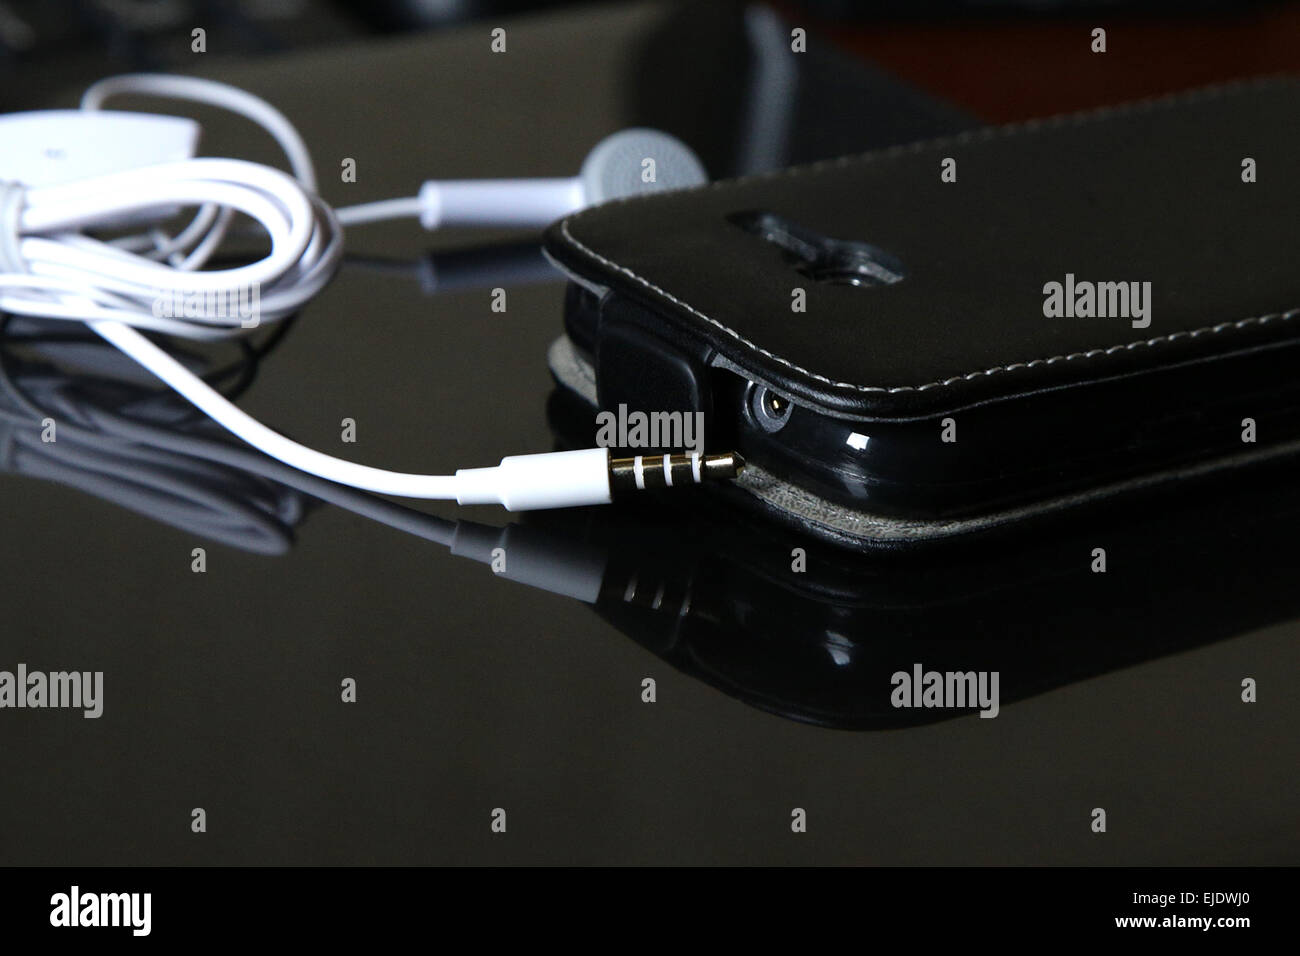 smart phone socket outlet with white earphones on black mirror surface Stock Photo